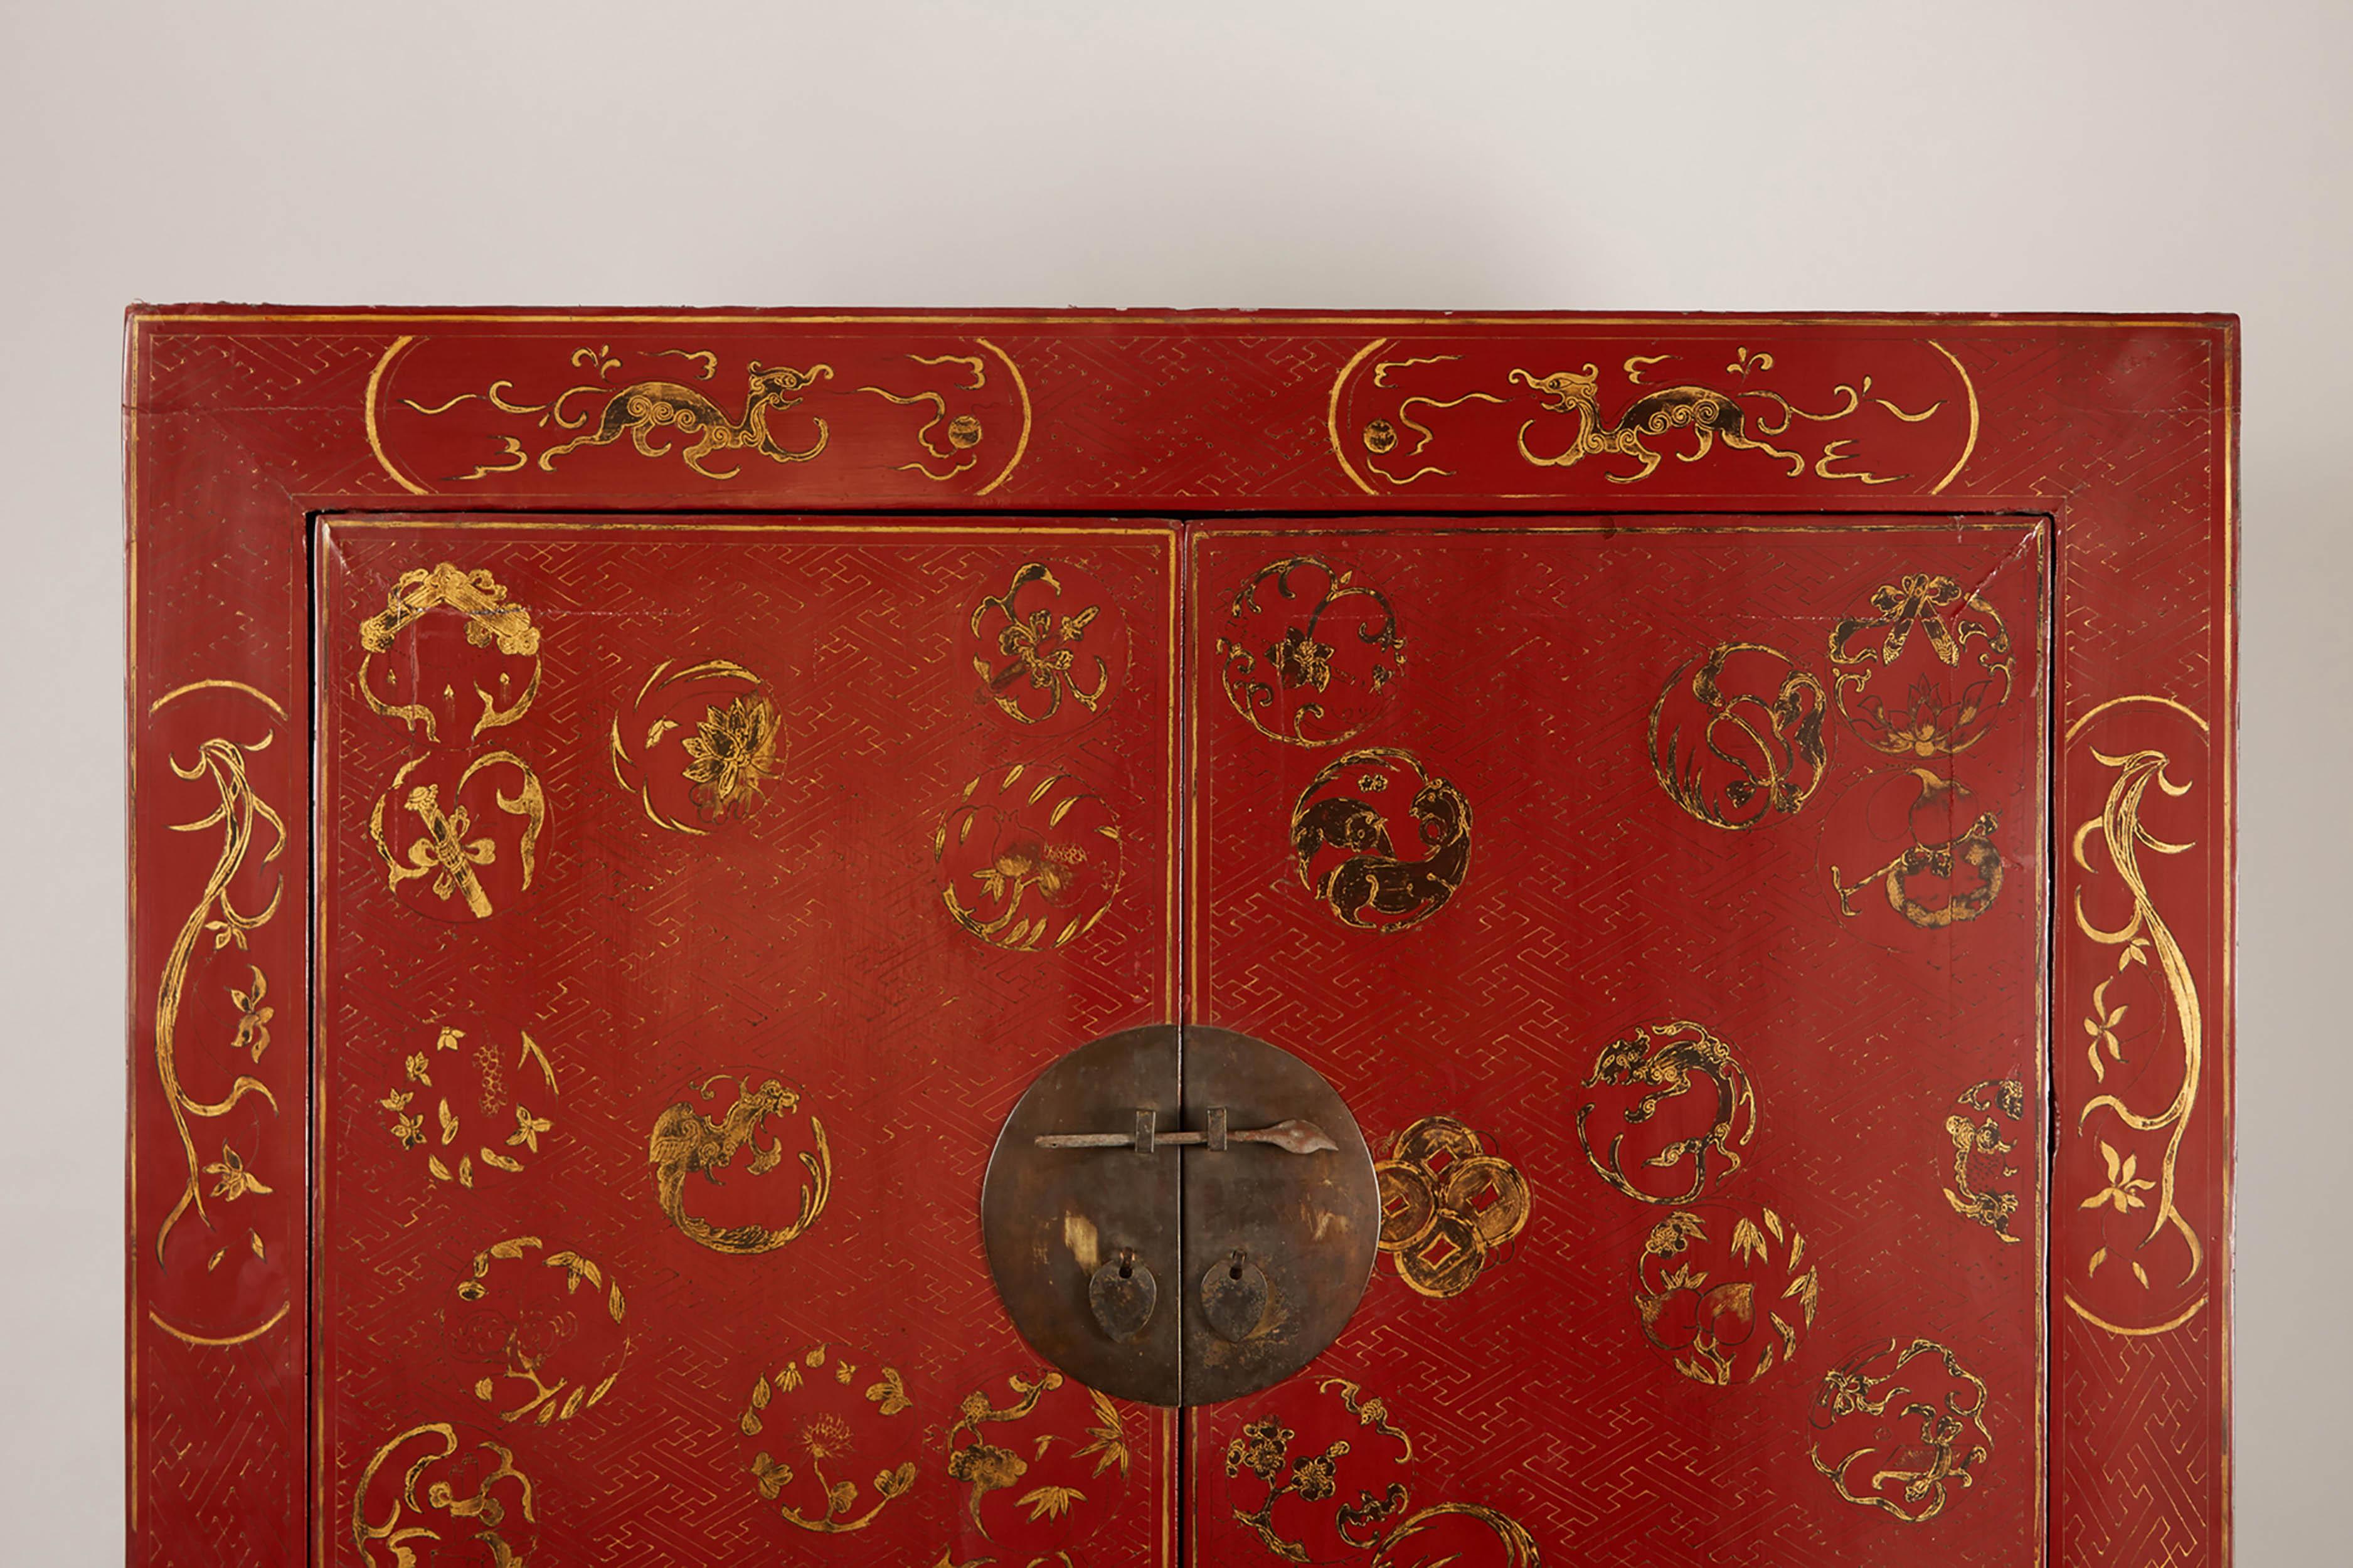 This 19th century Chinese cabinet is simple in design and features a round face plate with pierced knobs and metal pulls, an apron and an apron-head spandrel. The cabinet is painted in all red with gold painted designs. The motifs on the facade are